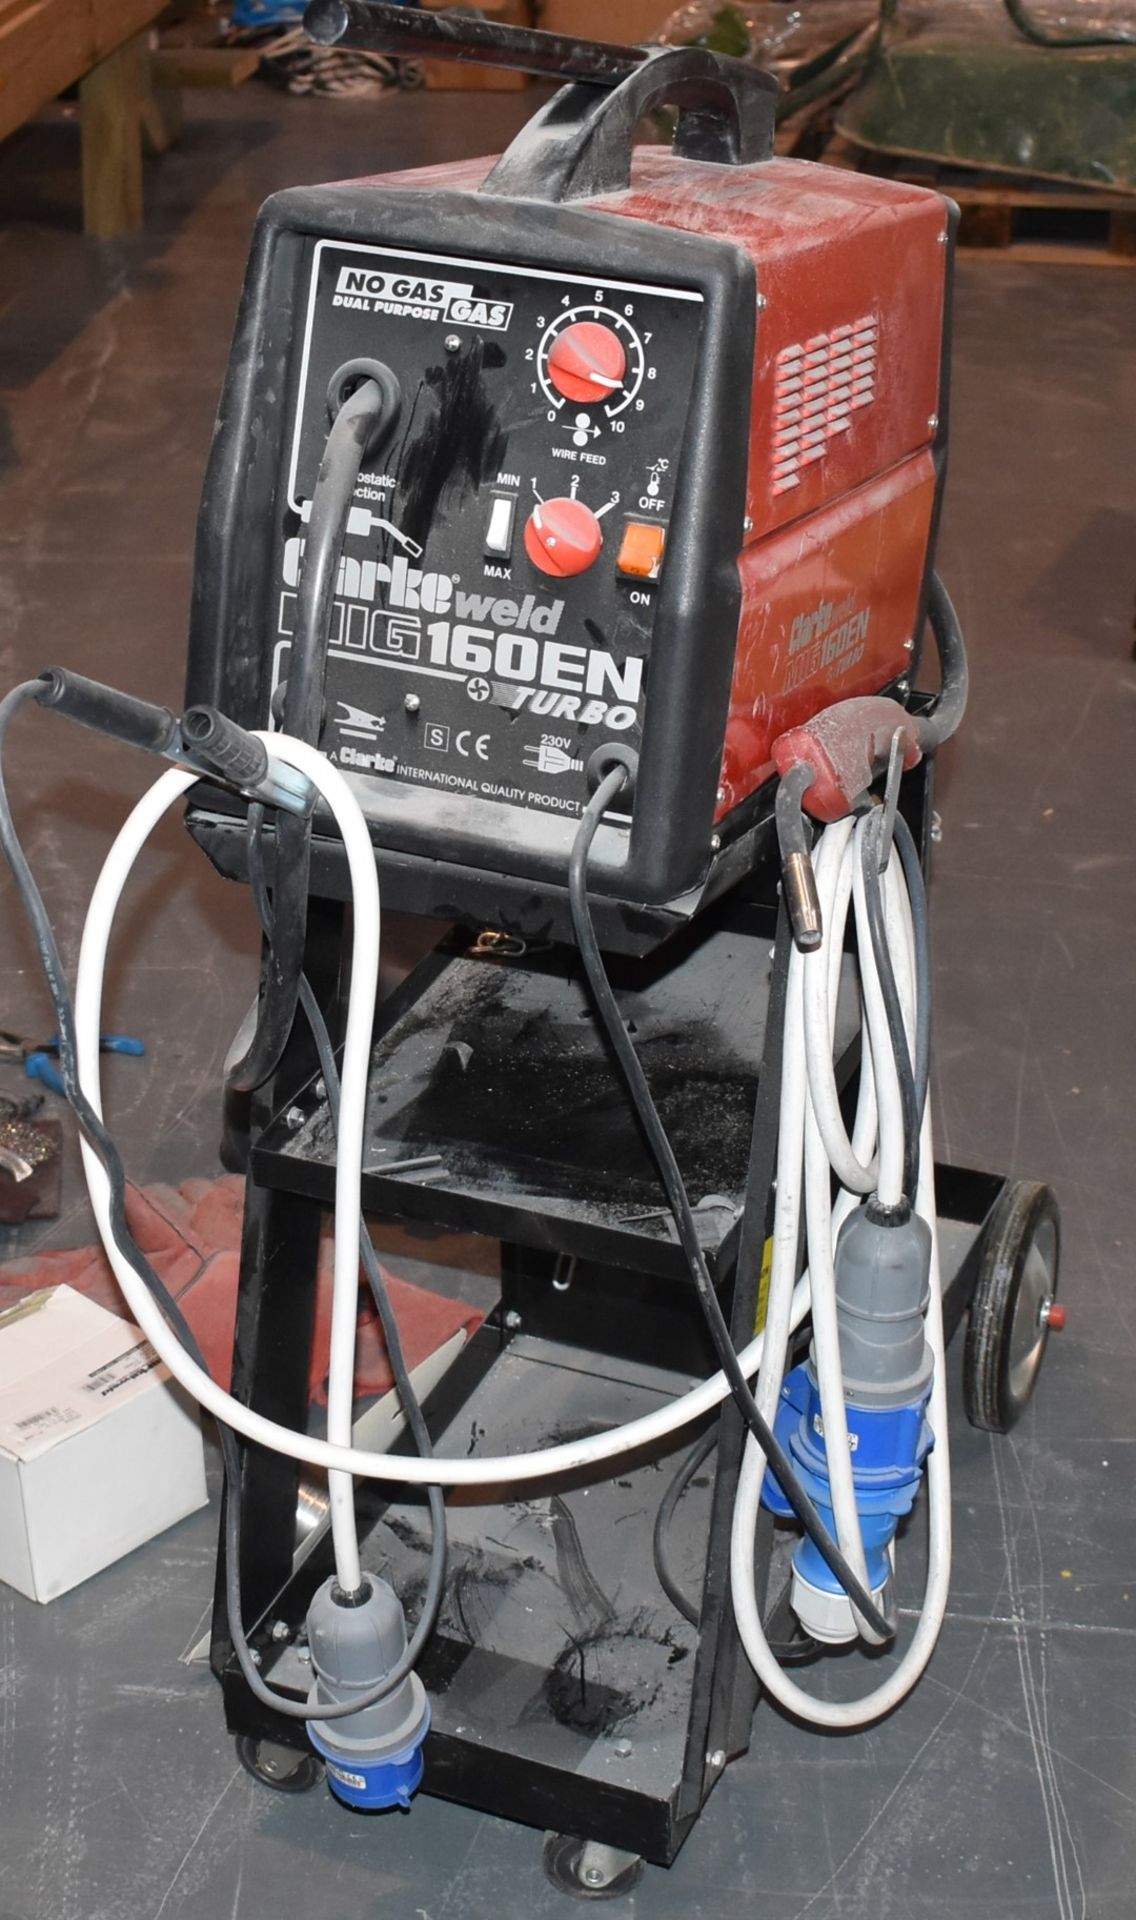 1 x Clarke MIG160EN Turbo No-Gas/Gas MIG Welder With Stand and Accessories - Ref 449 - CL501 - - Image 4 of 11